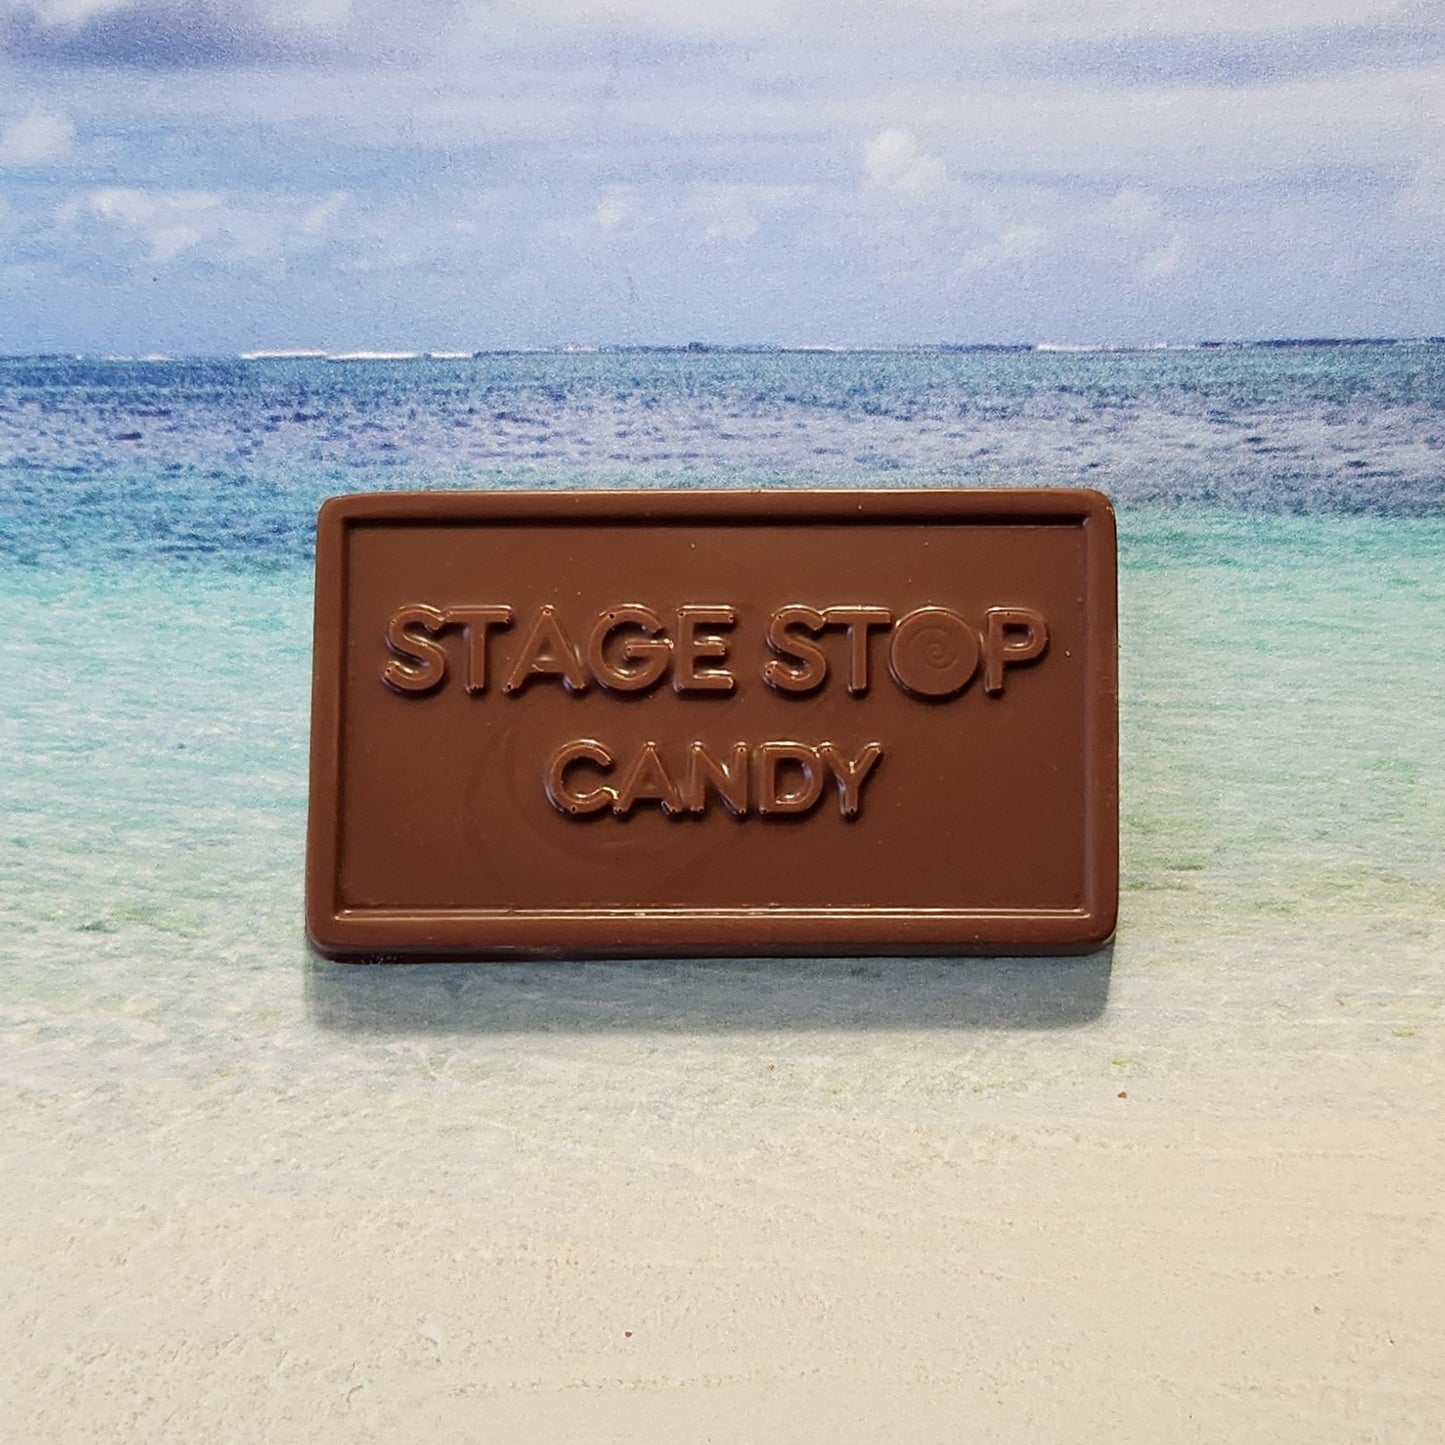 Stage Stop Candy Chocolate Card